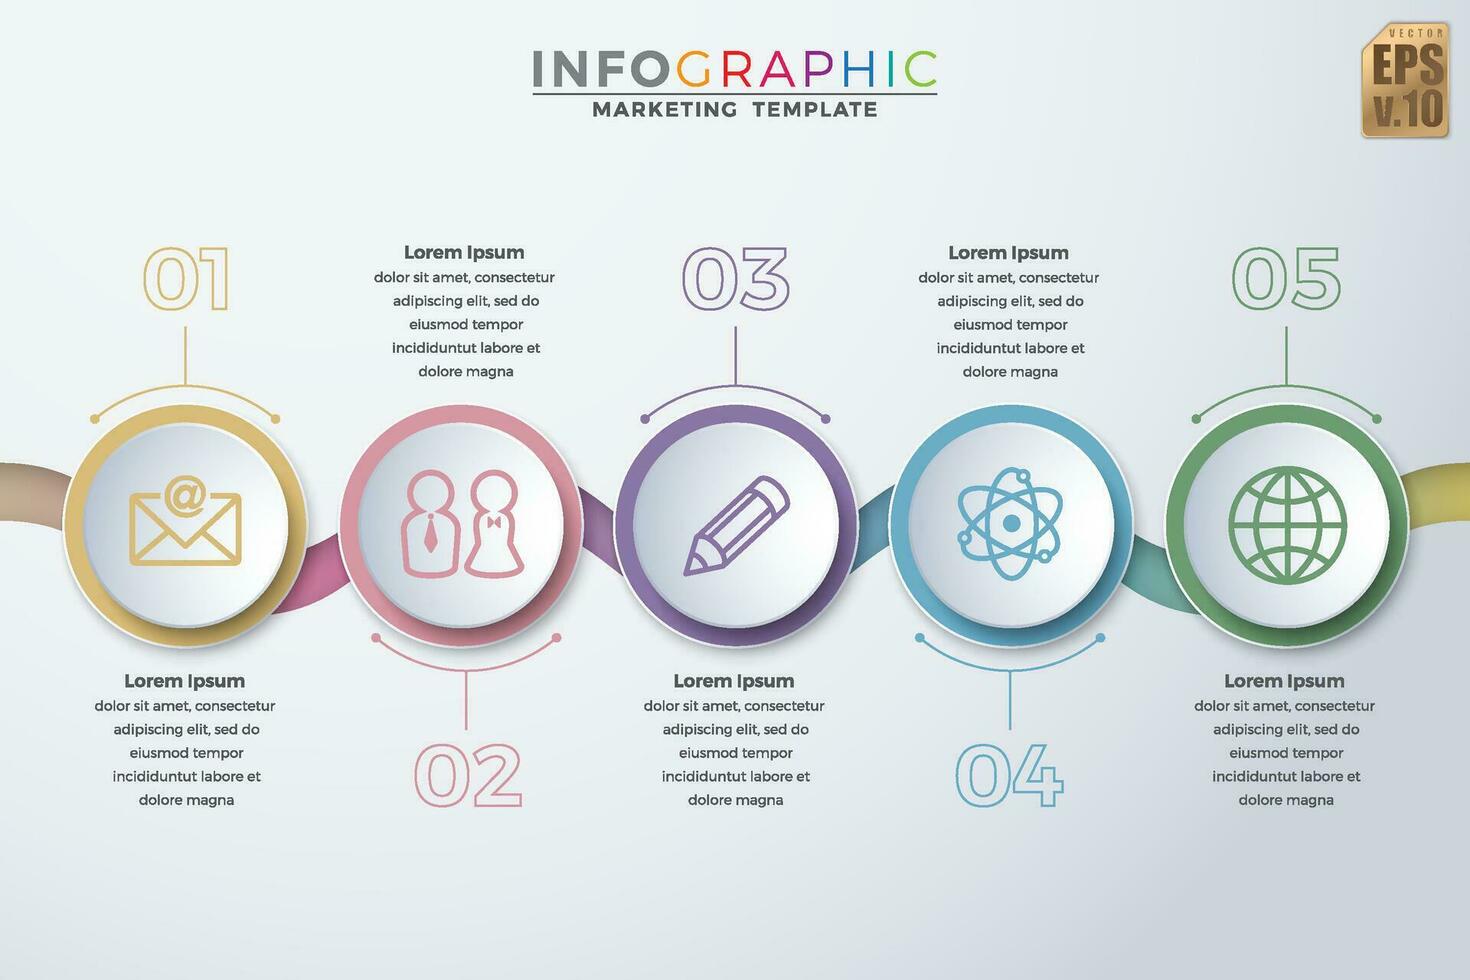 Infographic colorful Business template vector design circle icons 5 options or steps in minimal style. You can used for Marketing process, workflow presentations layout, flow chart, print ad.